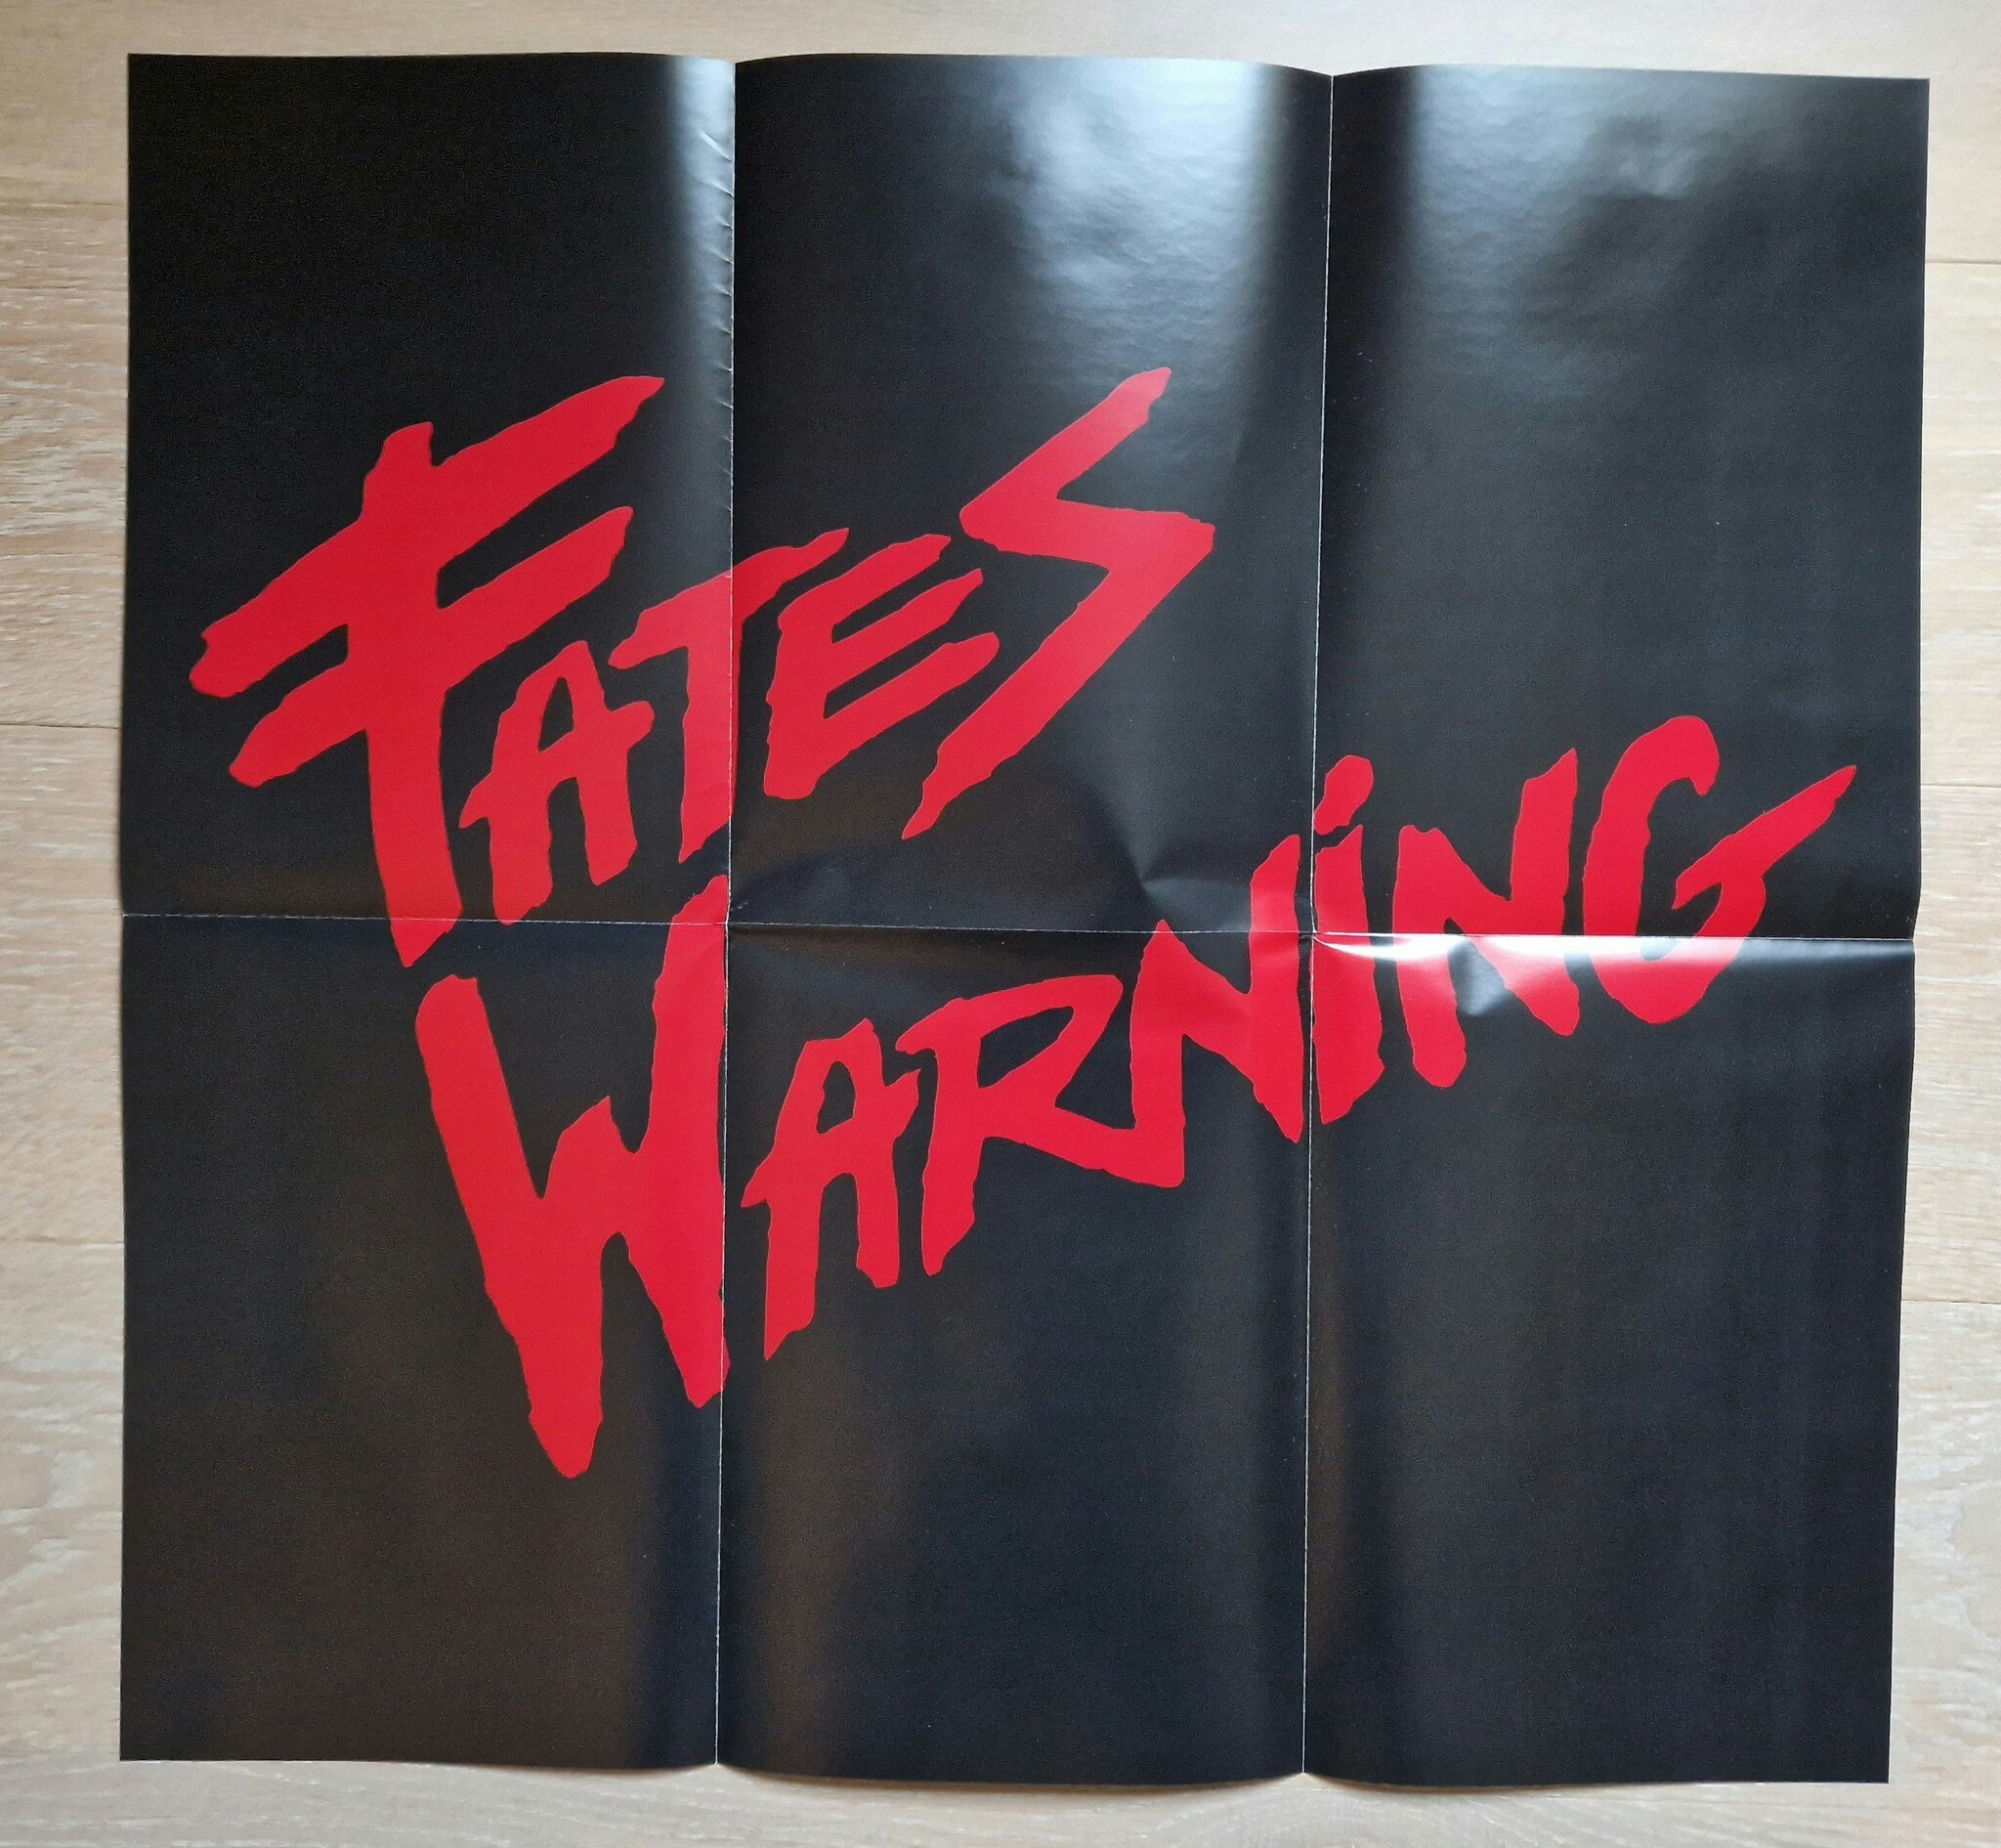 Fates Warning, The spectre within. Vinyl LP